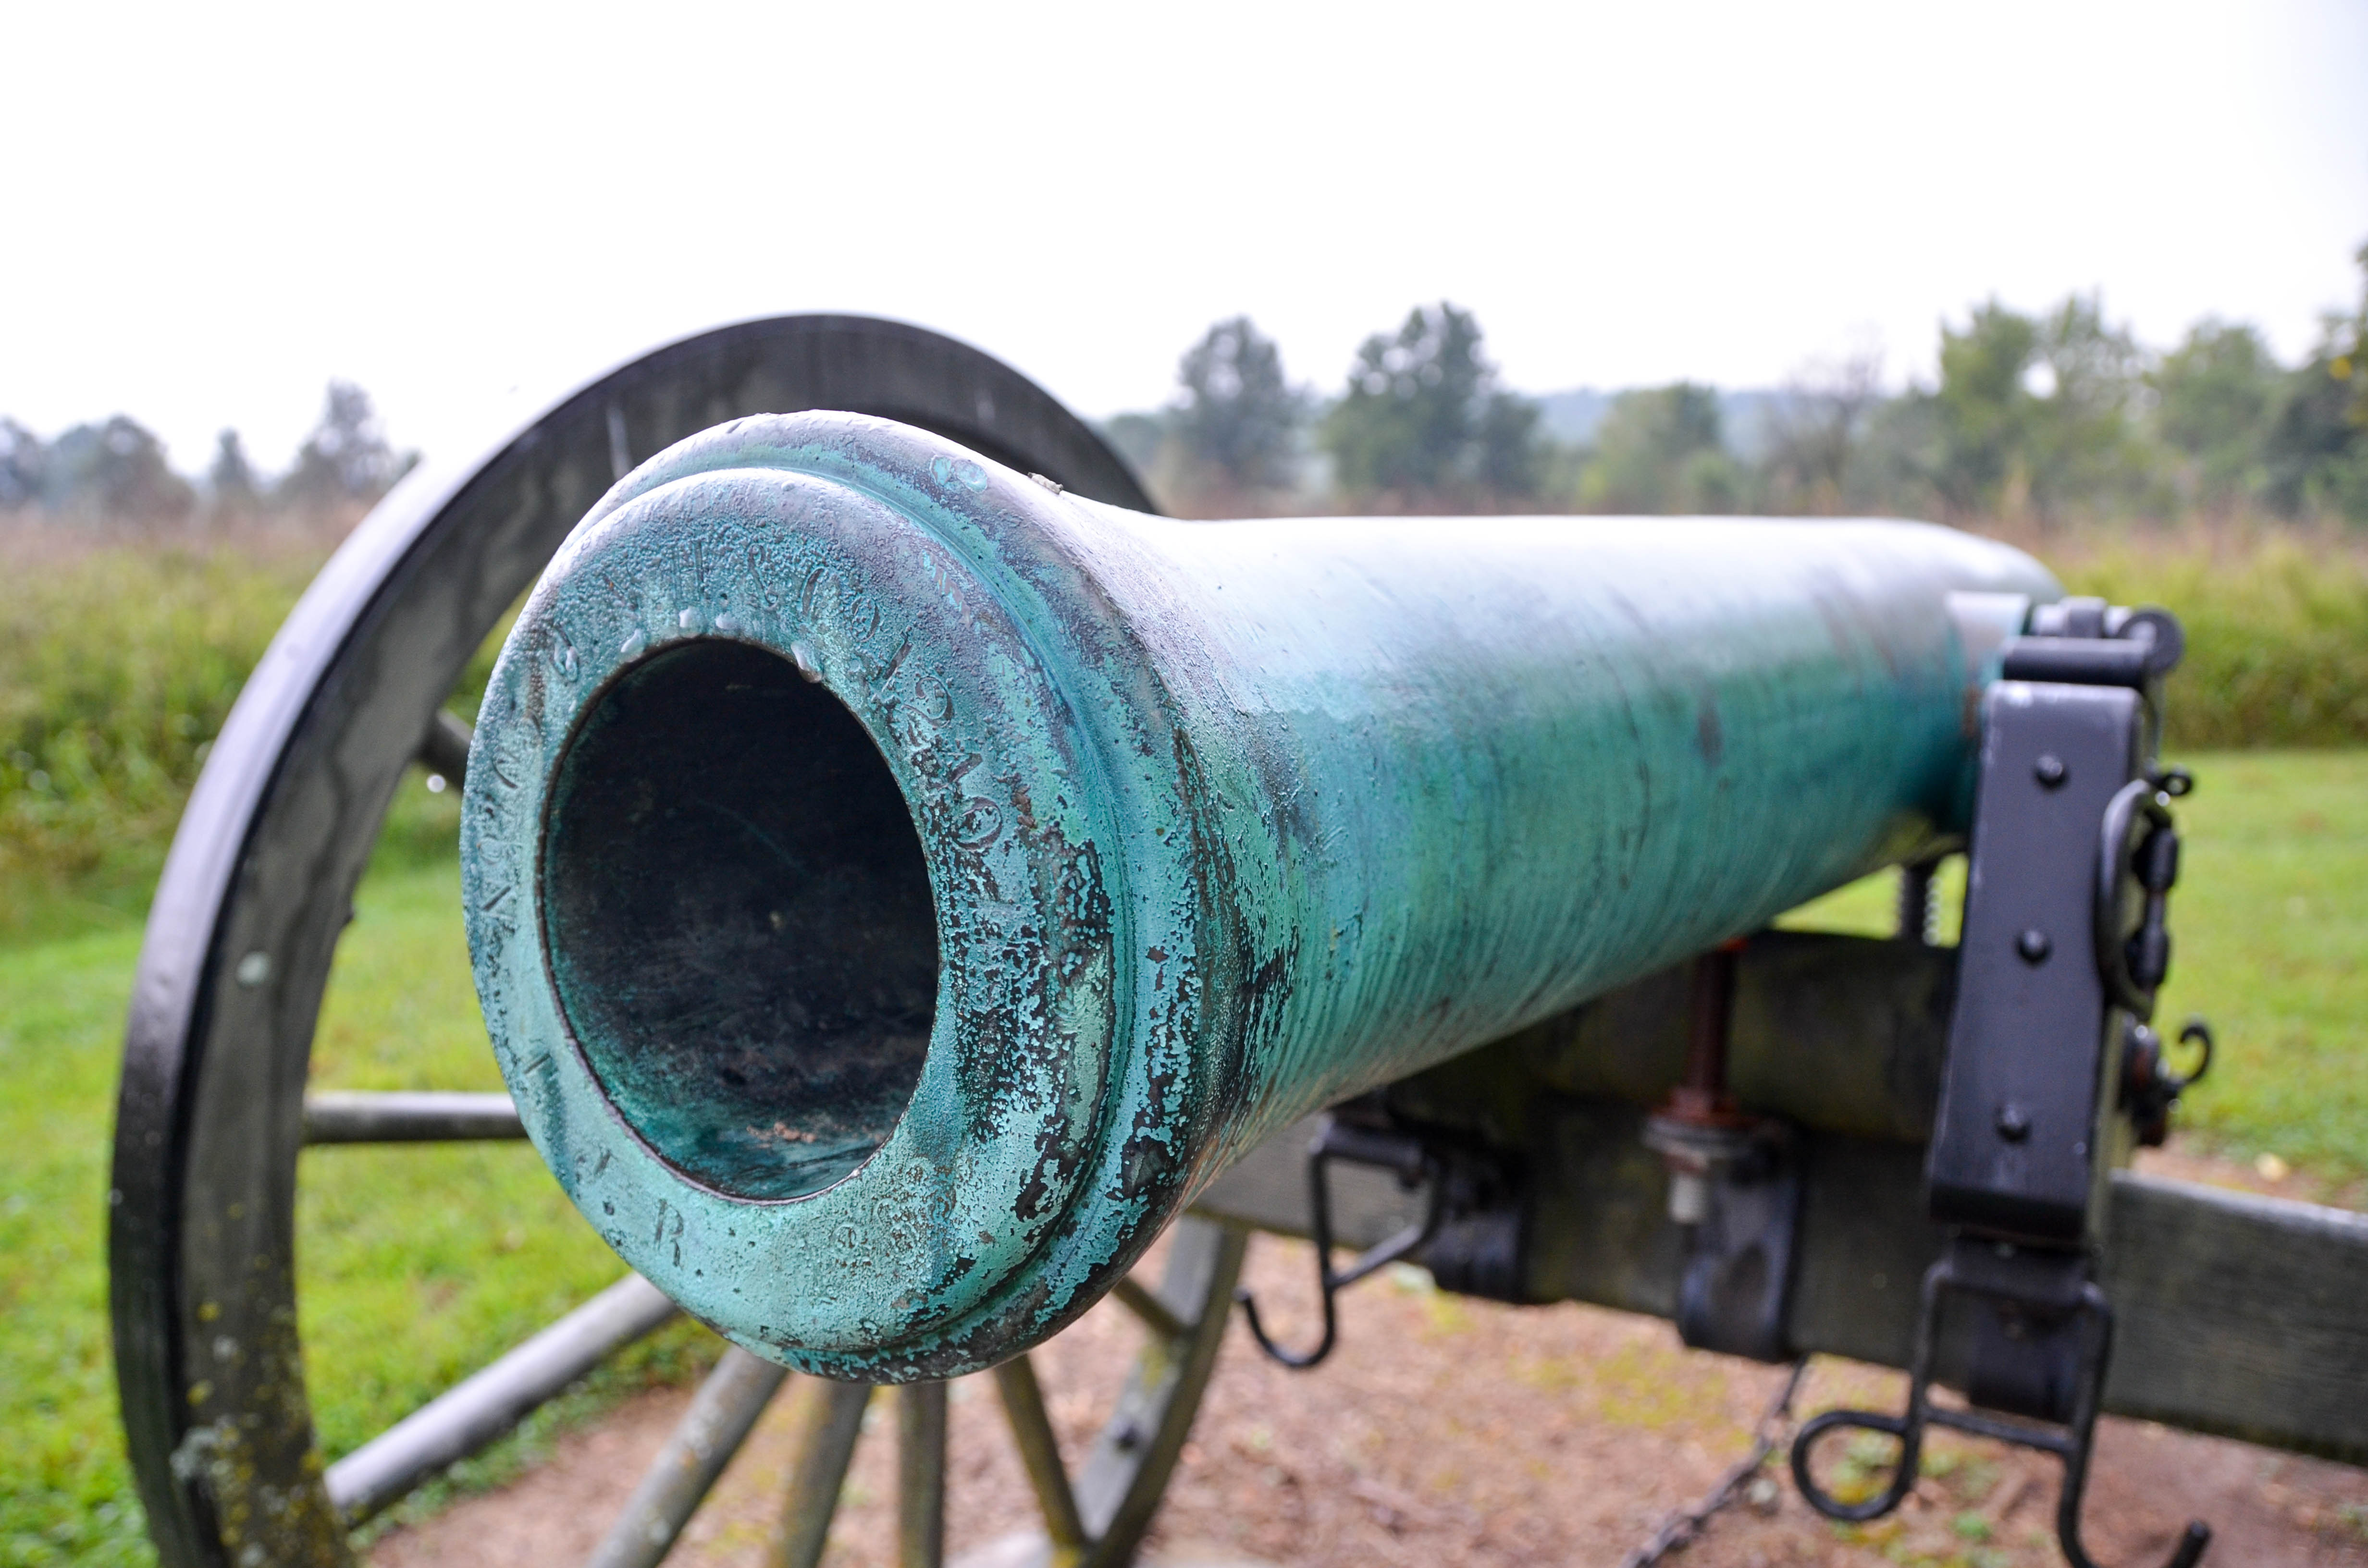 These are authentic Civil War canons.